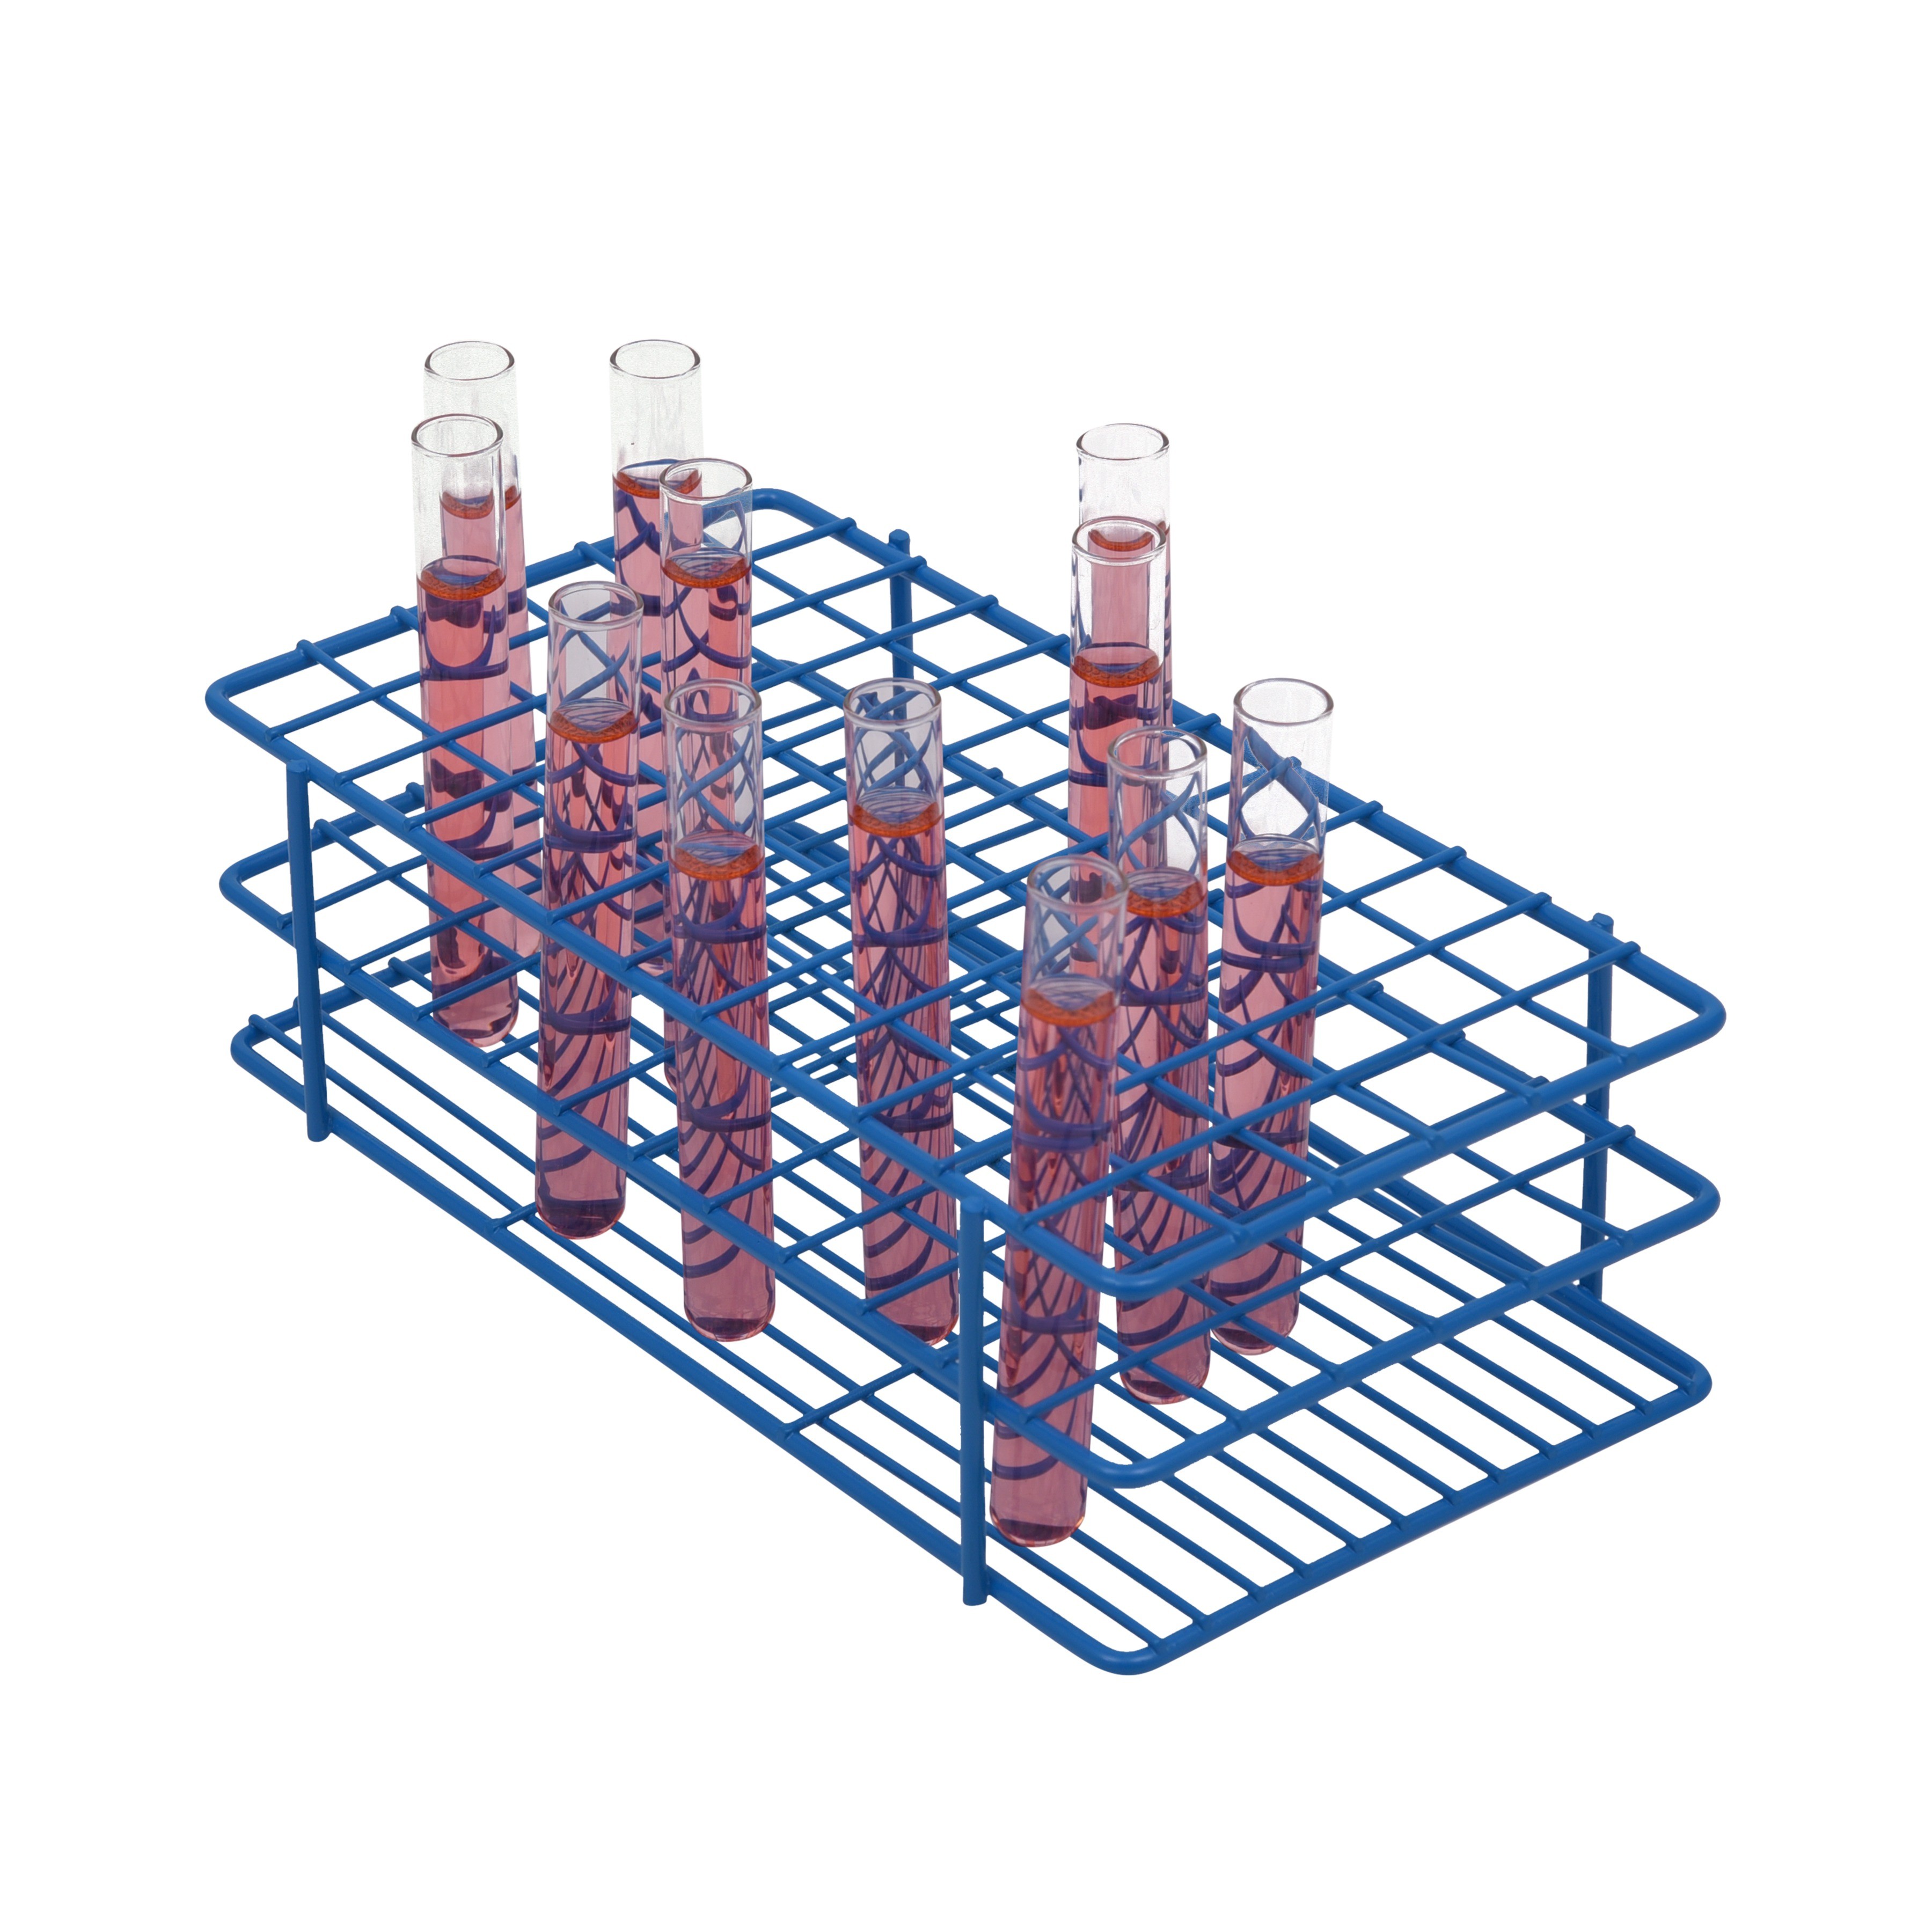 Bel-Art F18786-0750 Poxygrid “Rack And A Half” Test Tube Rack; 10-13mm 120 Places 13¹/₃₂ x 4⁵/₁₆ x 2⅜ in. 